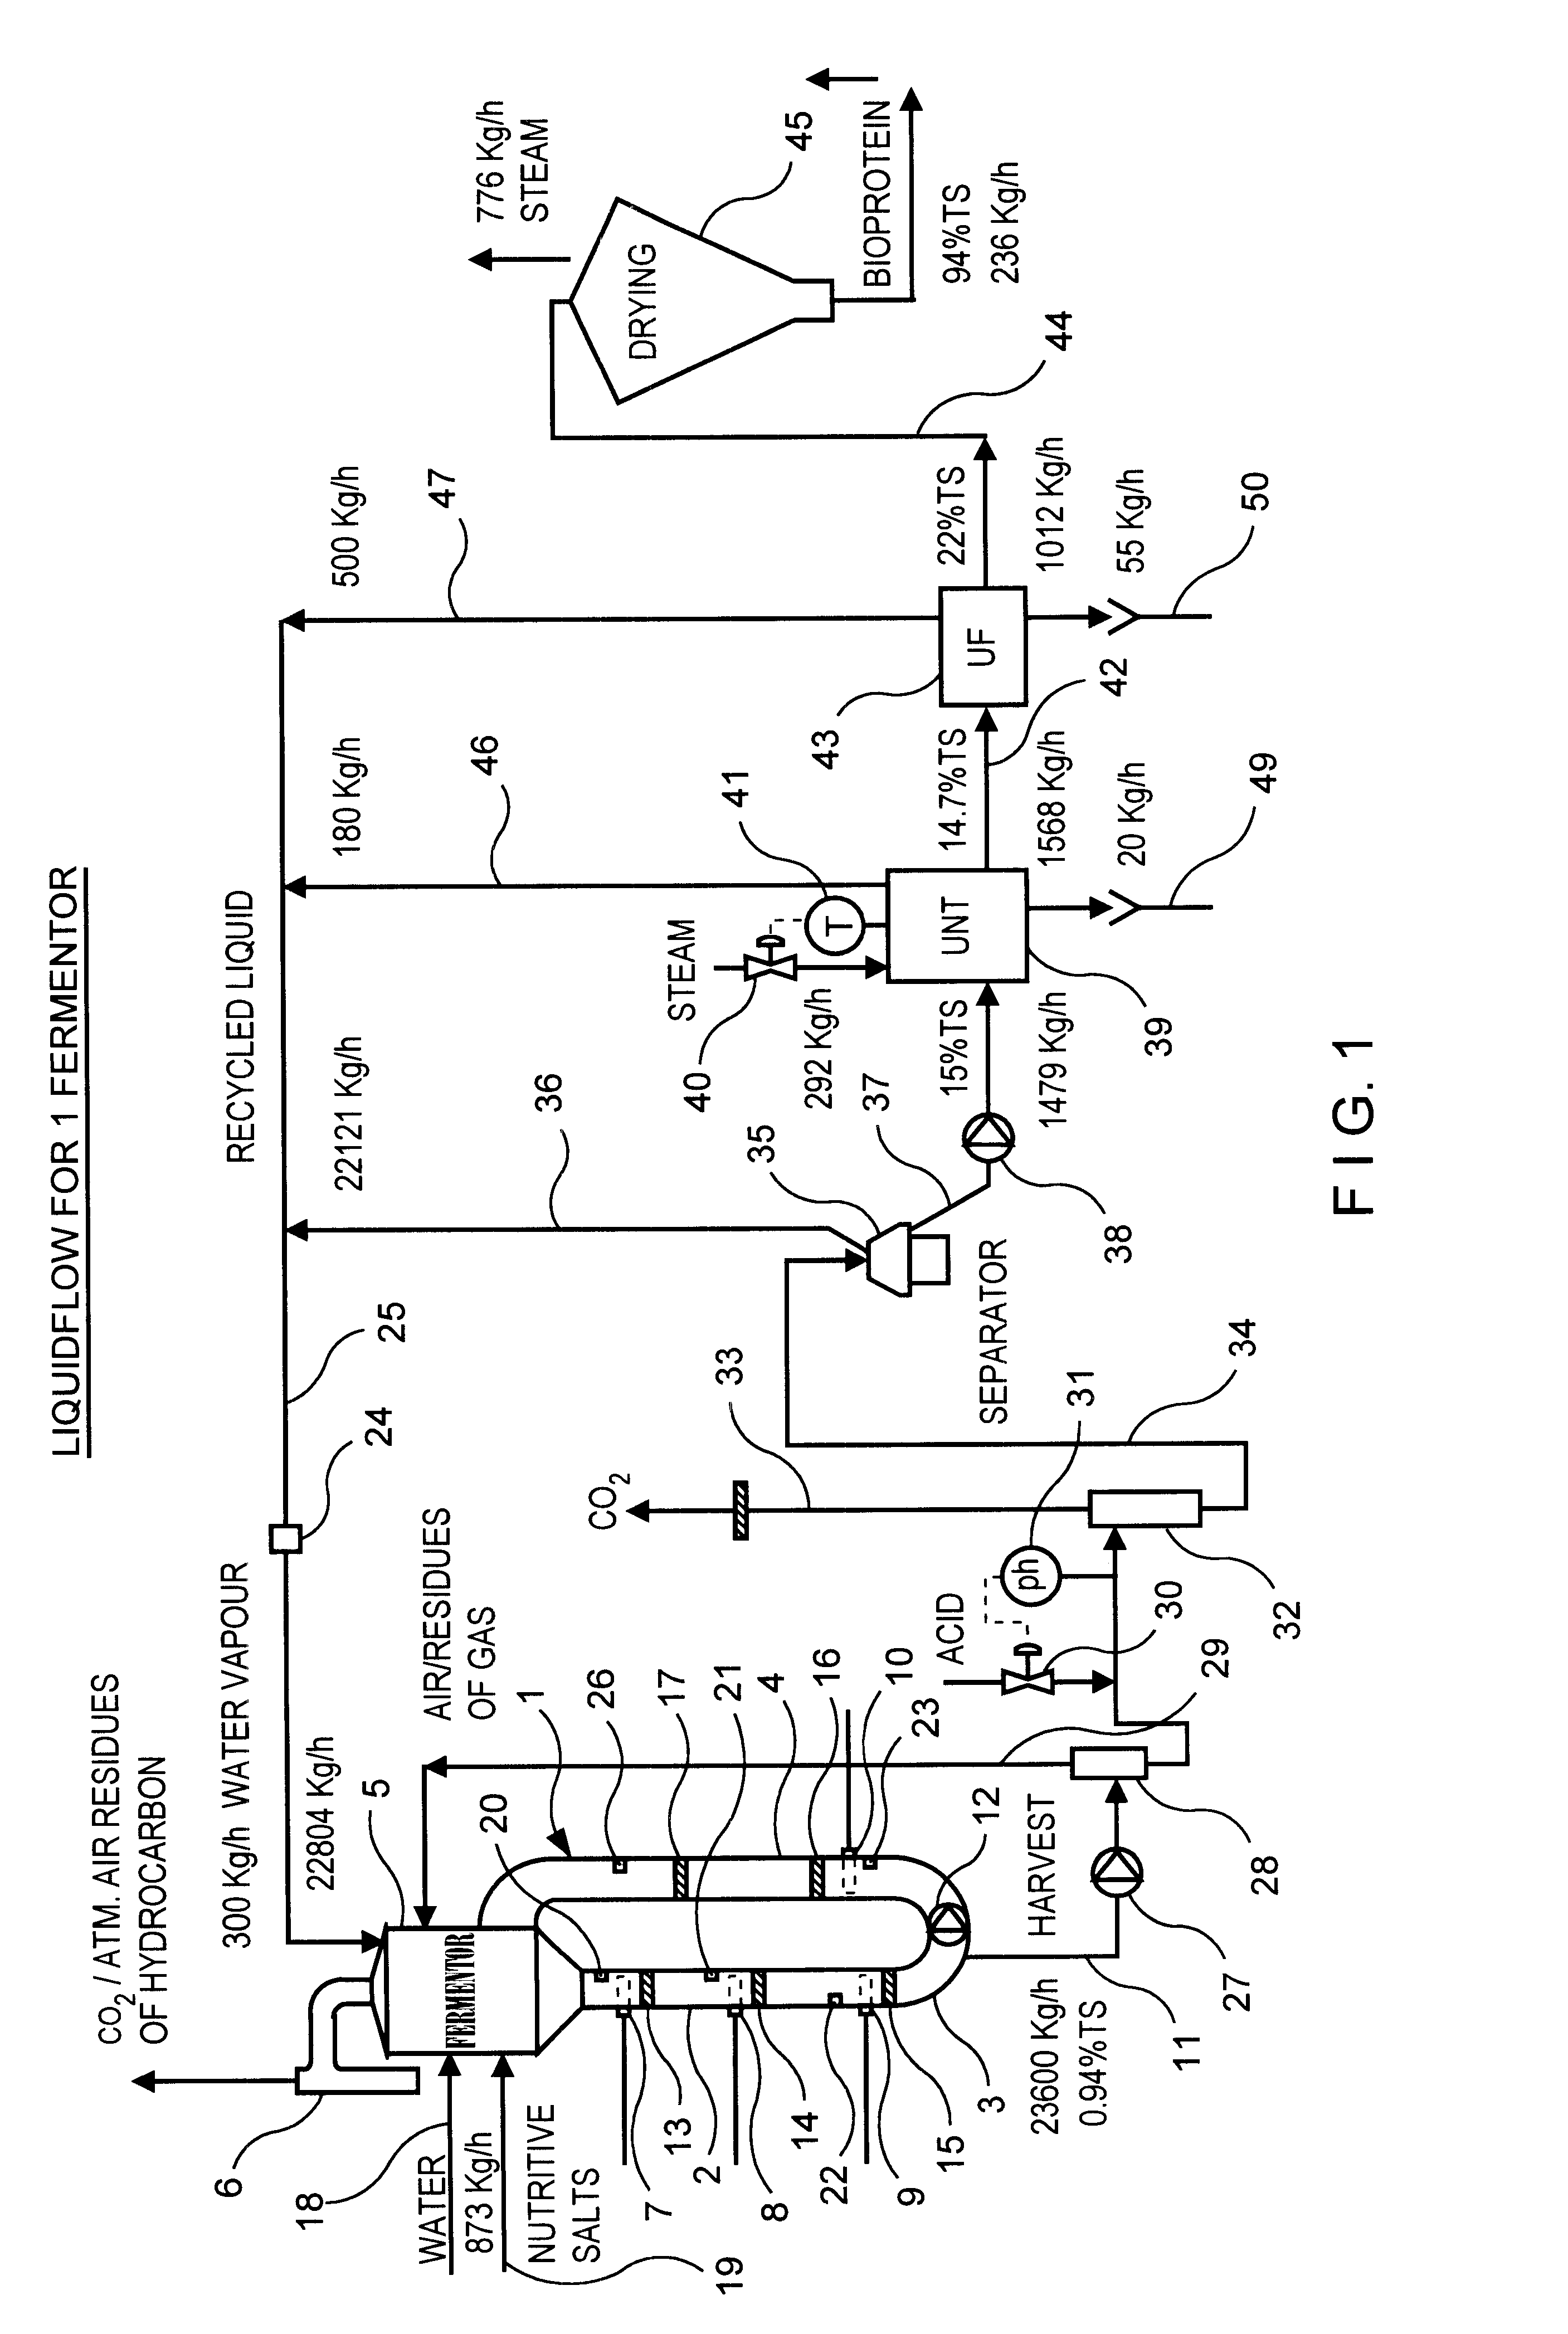 U-shape and/or nozzle u-loop fermentor and method of carrying out a fermentation process